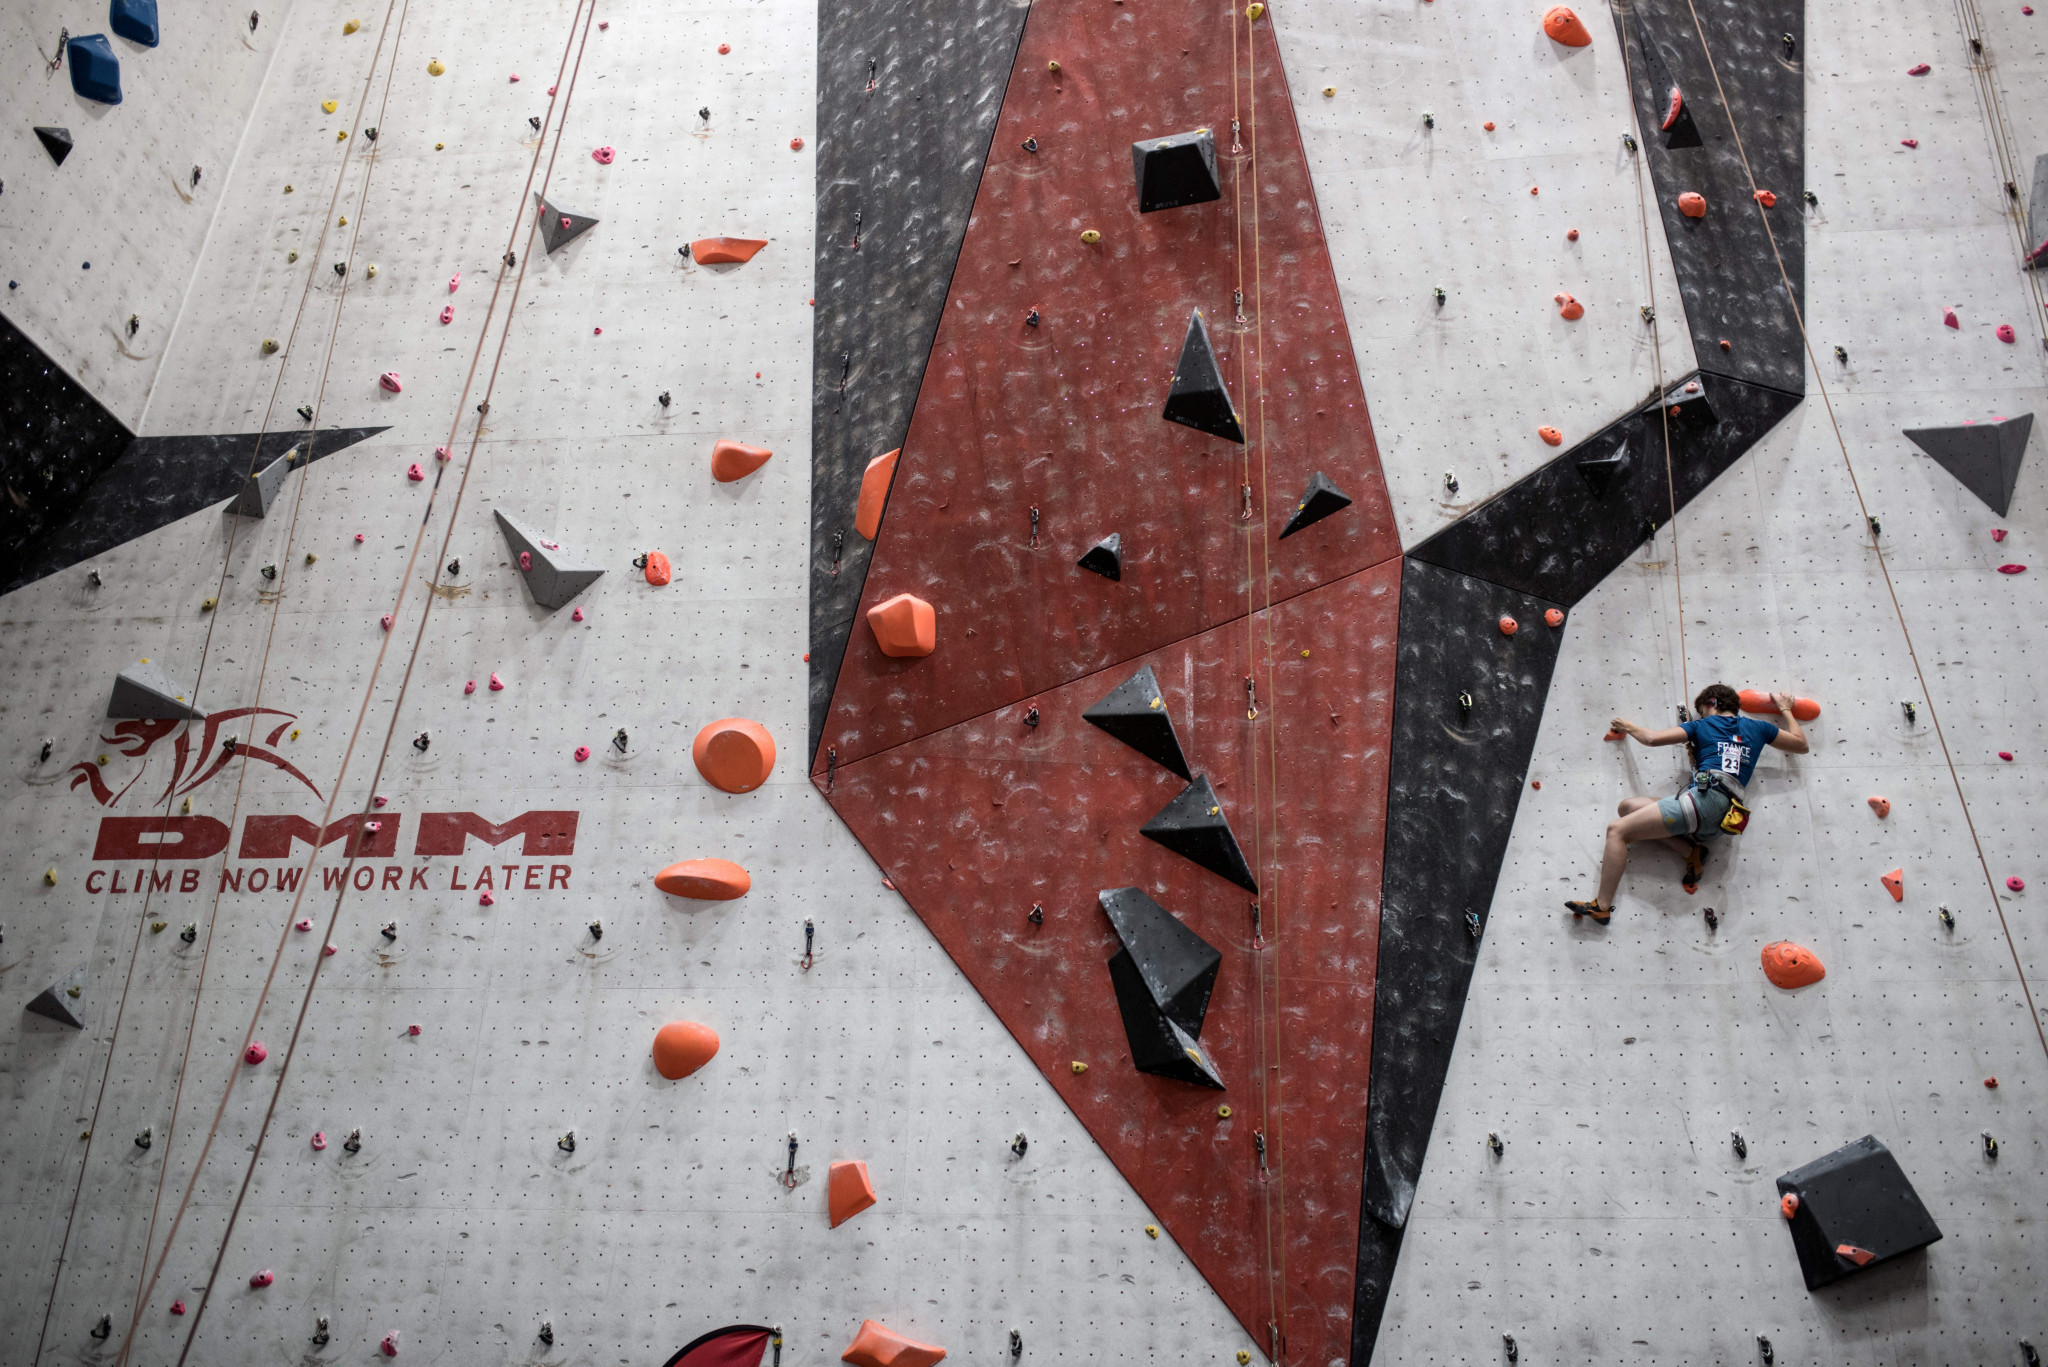 McArthur maintains excellent form to win at IFSC Climbing Youth World Championships